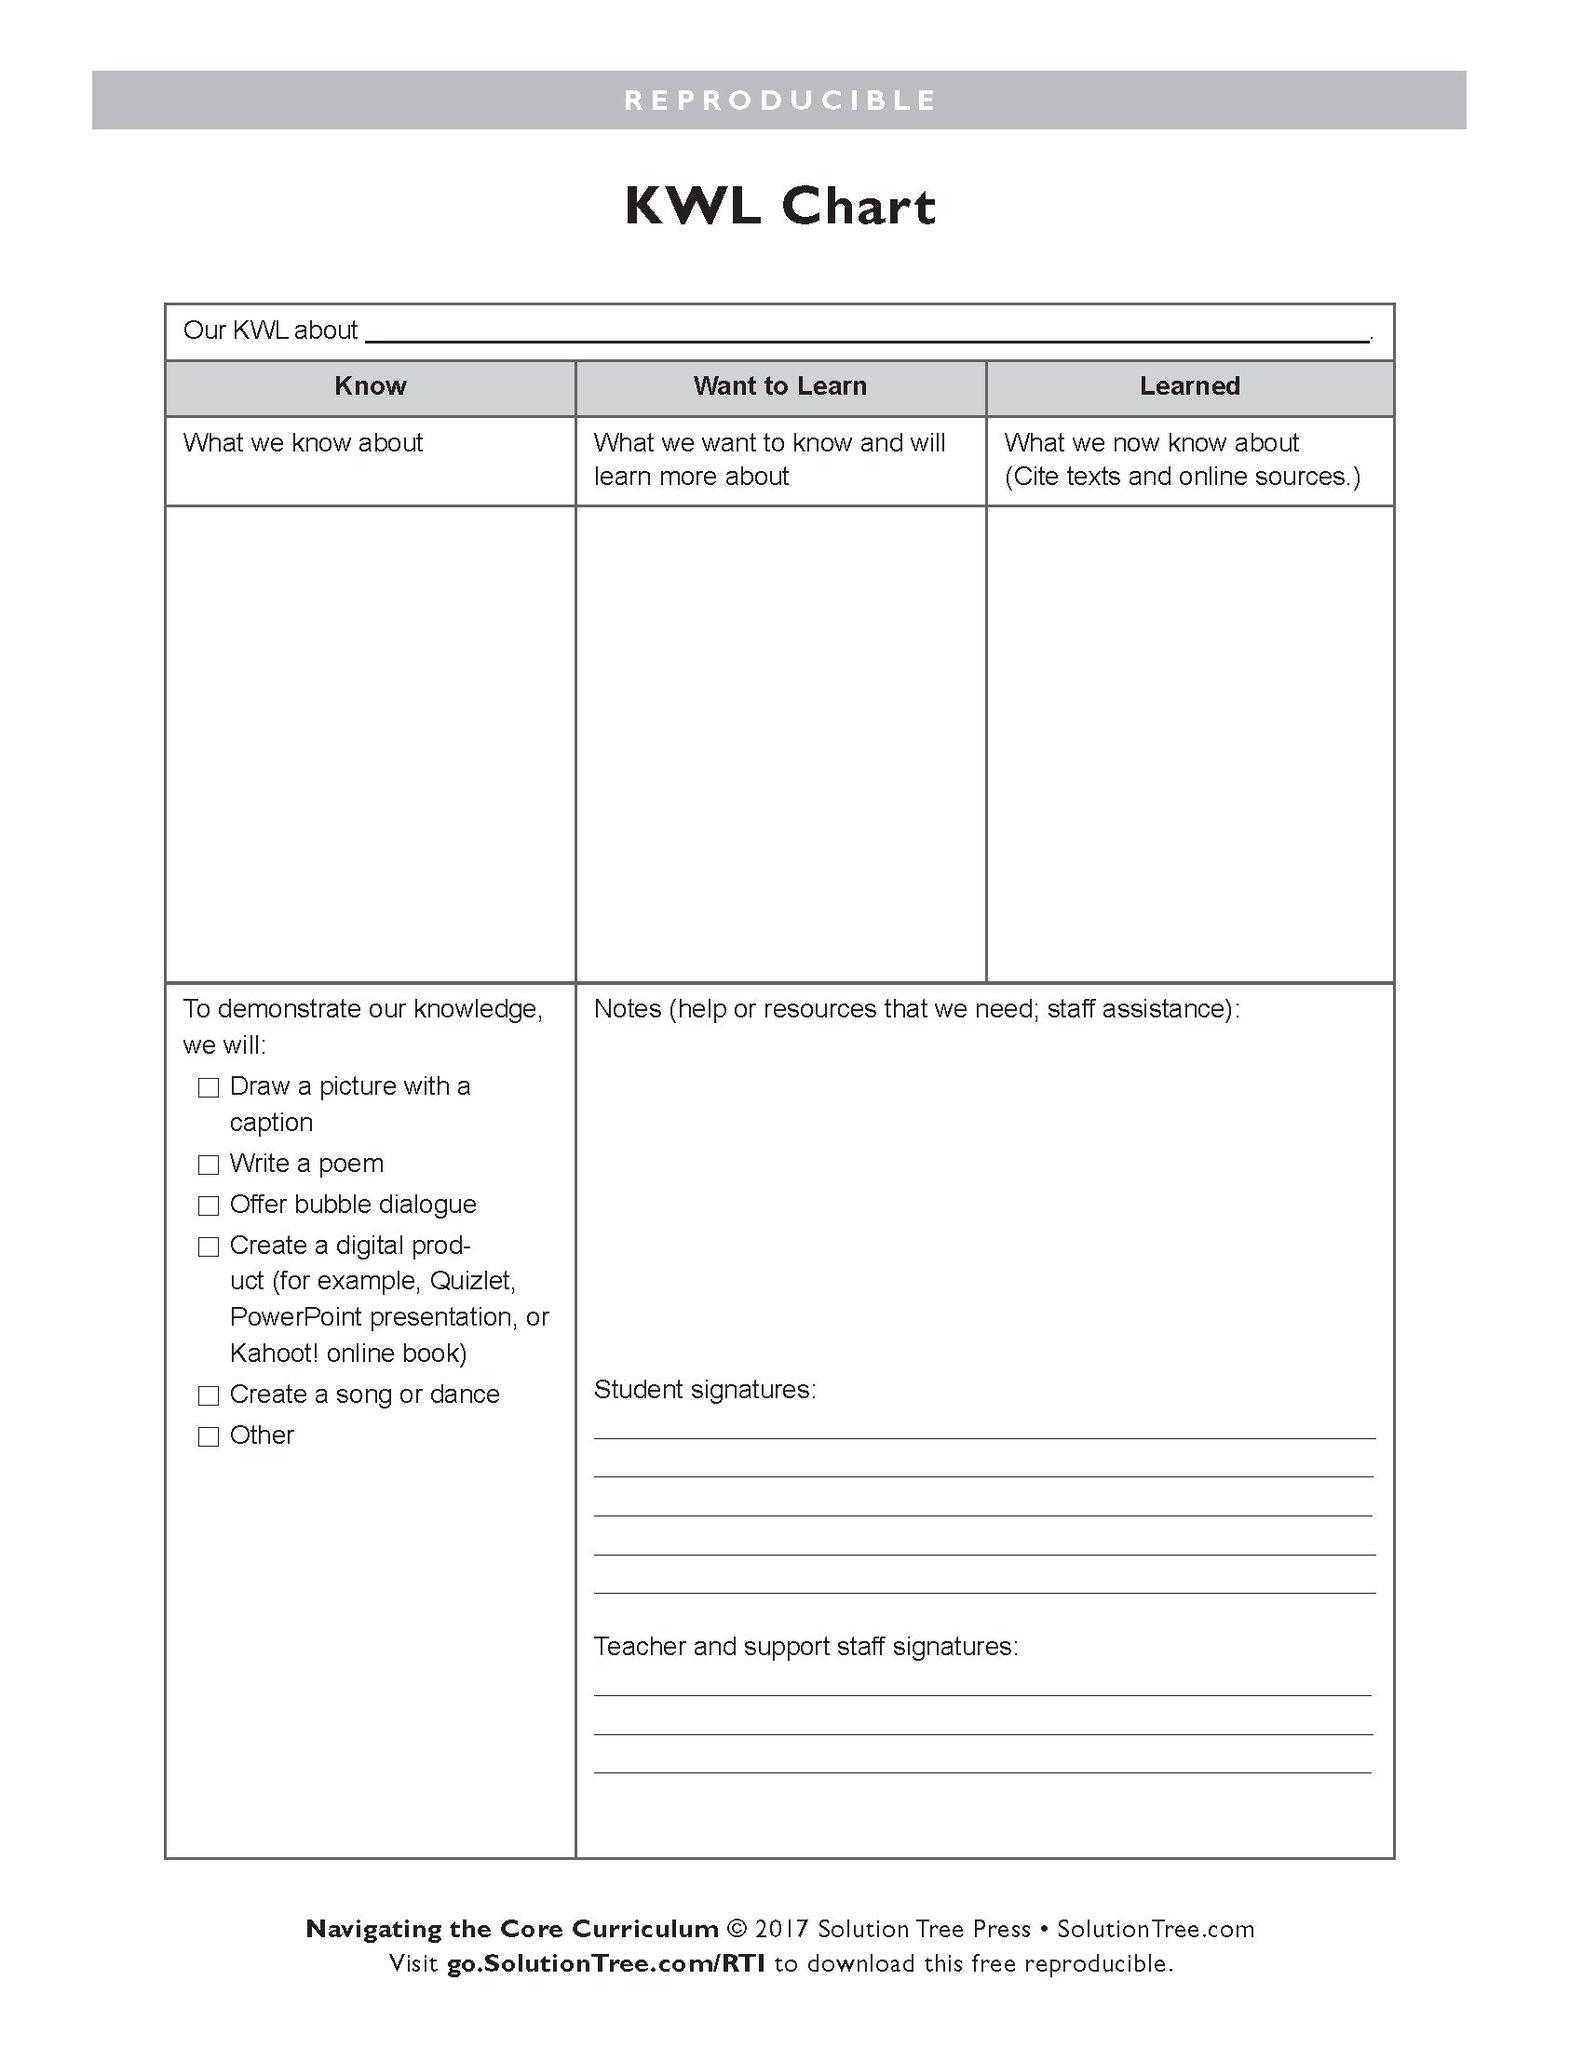 Kwl Worksheet Pdf | Printable Worksheets And Activities For With Kwl Chart Template Word Document